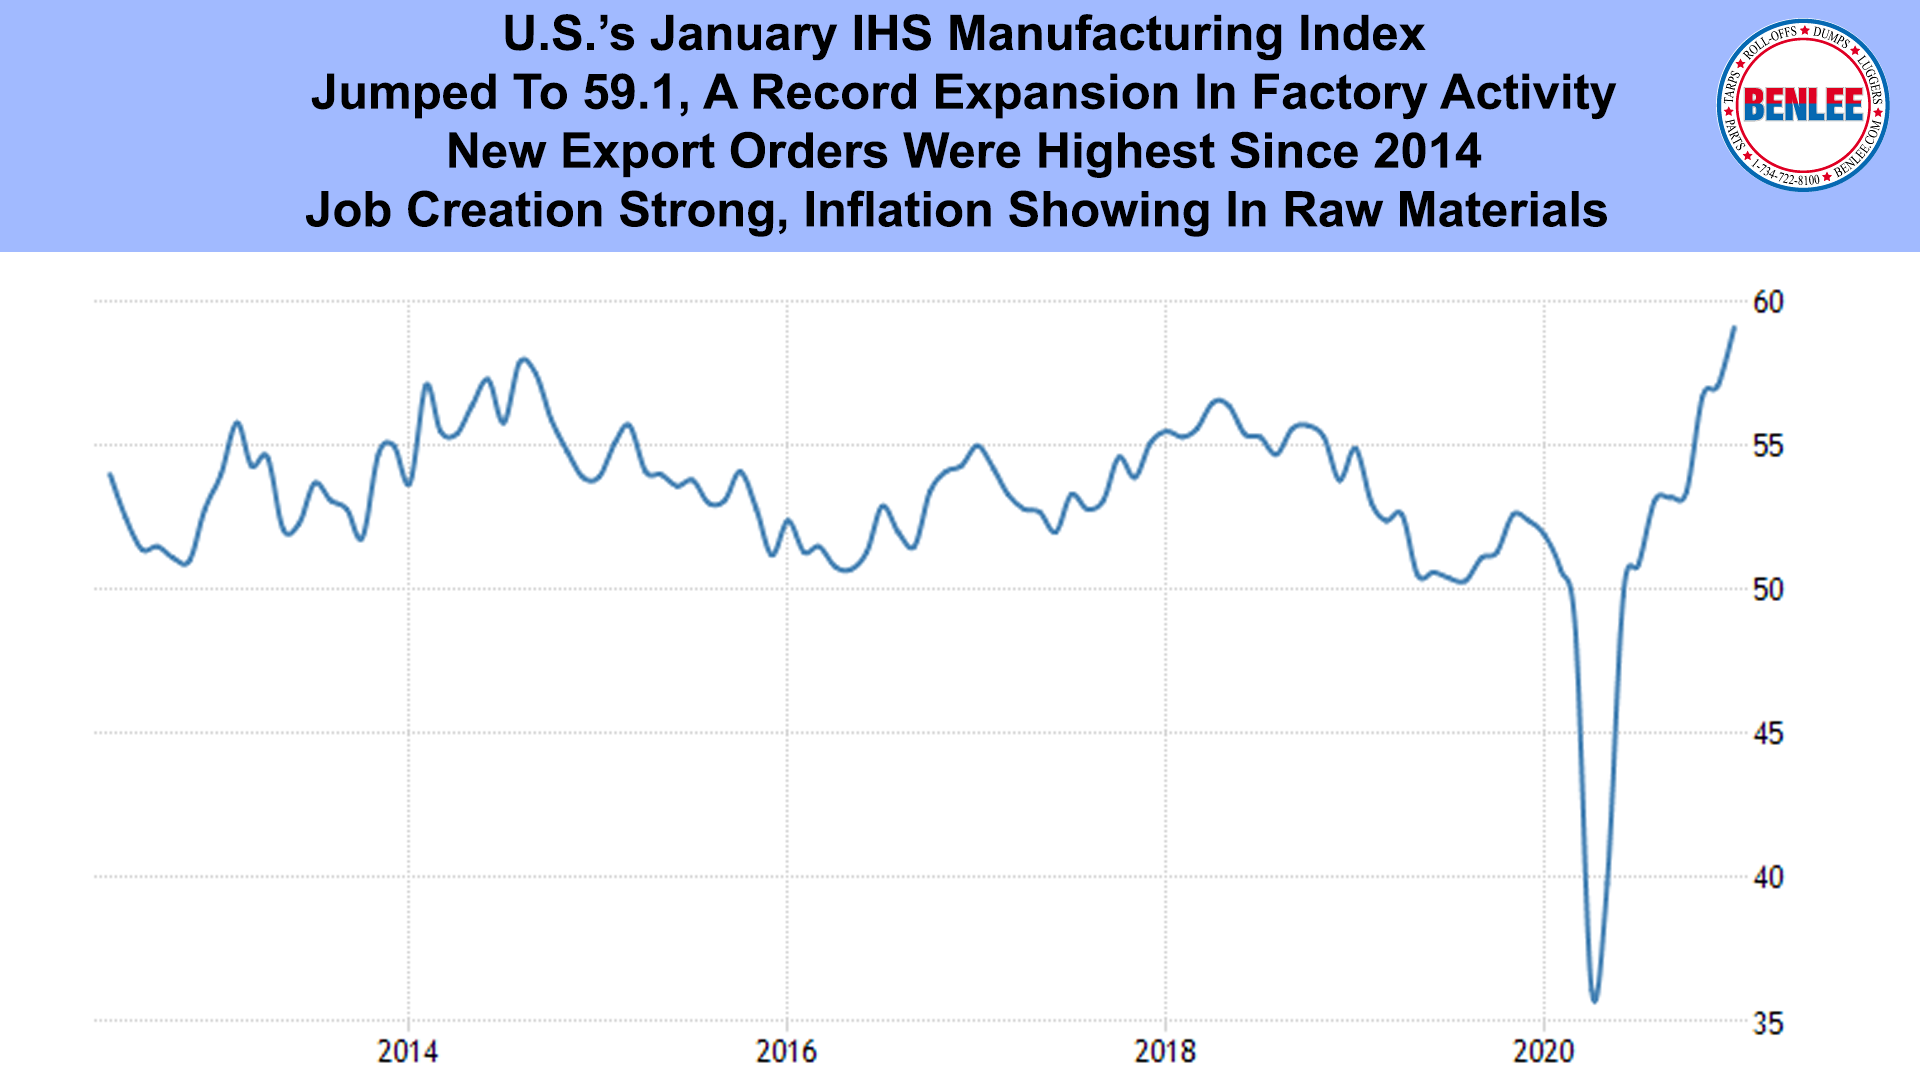 U.S.’s January IHS Manufacturing Index